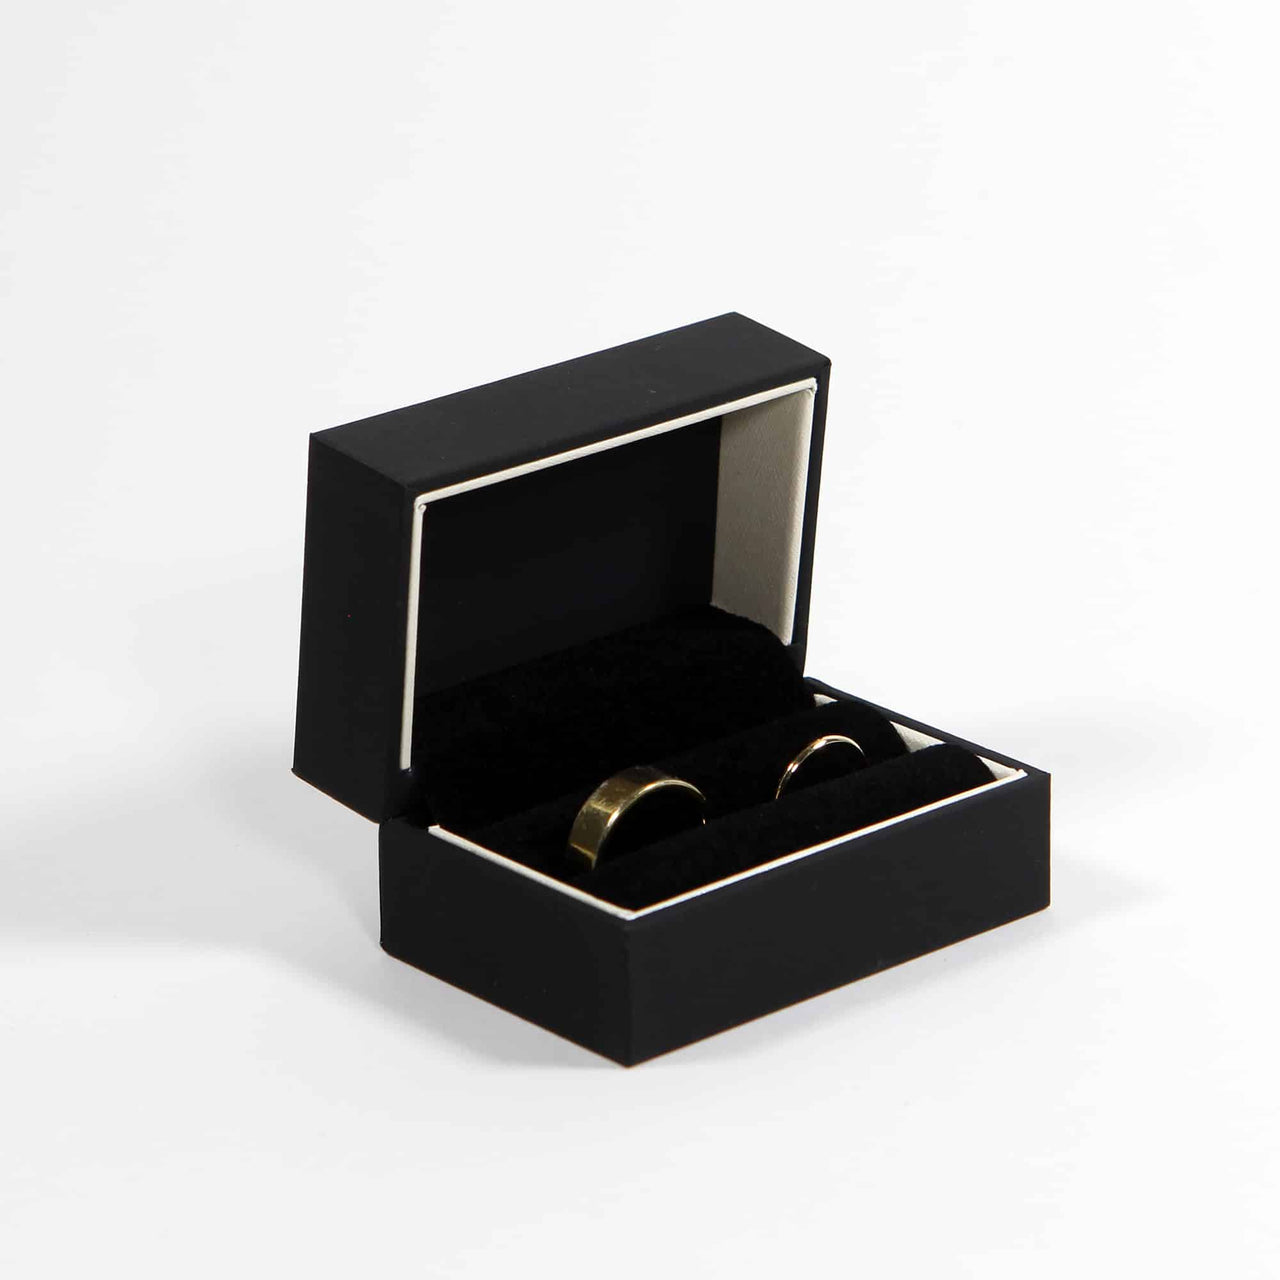 black and white wedding ring box for wedding ceremonies and events, holds 2 rings 